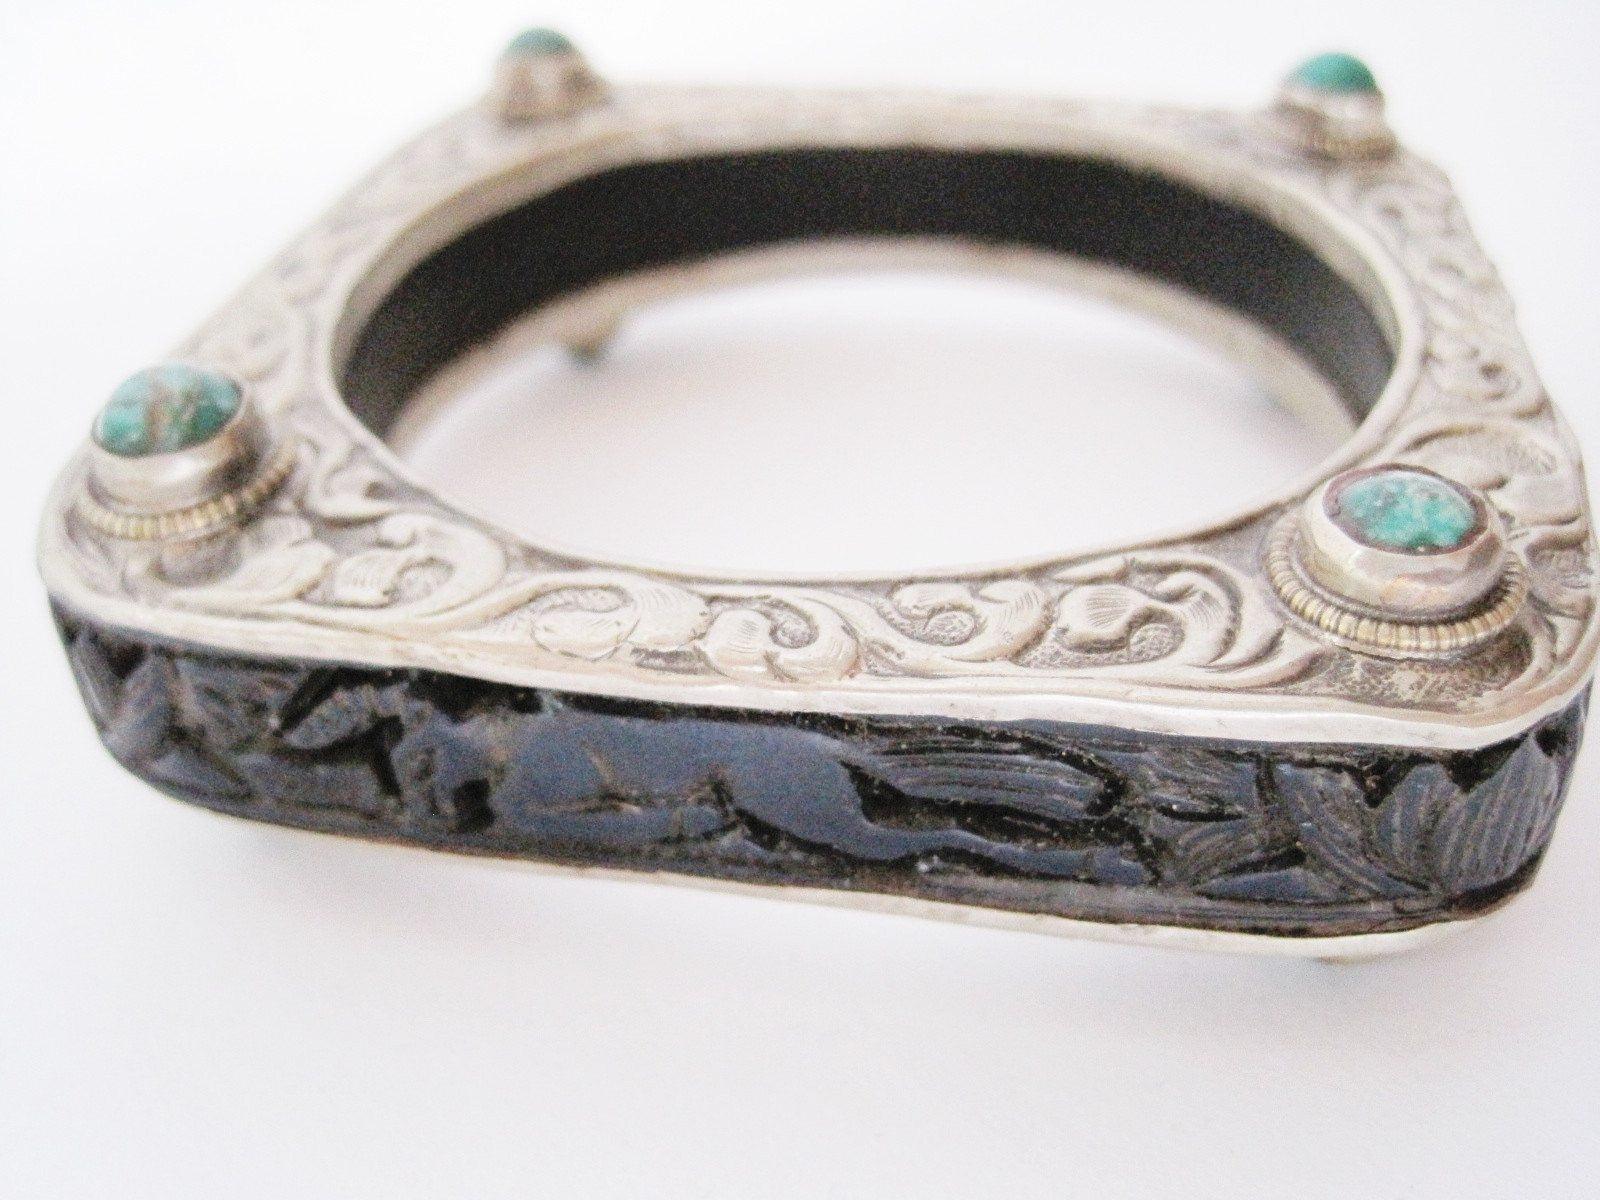 Vintage Square Carved Animal Purple Resin Bracelet from Nepal or Tibet with Silver Metal Overlay - Anteeka